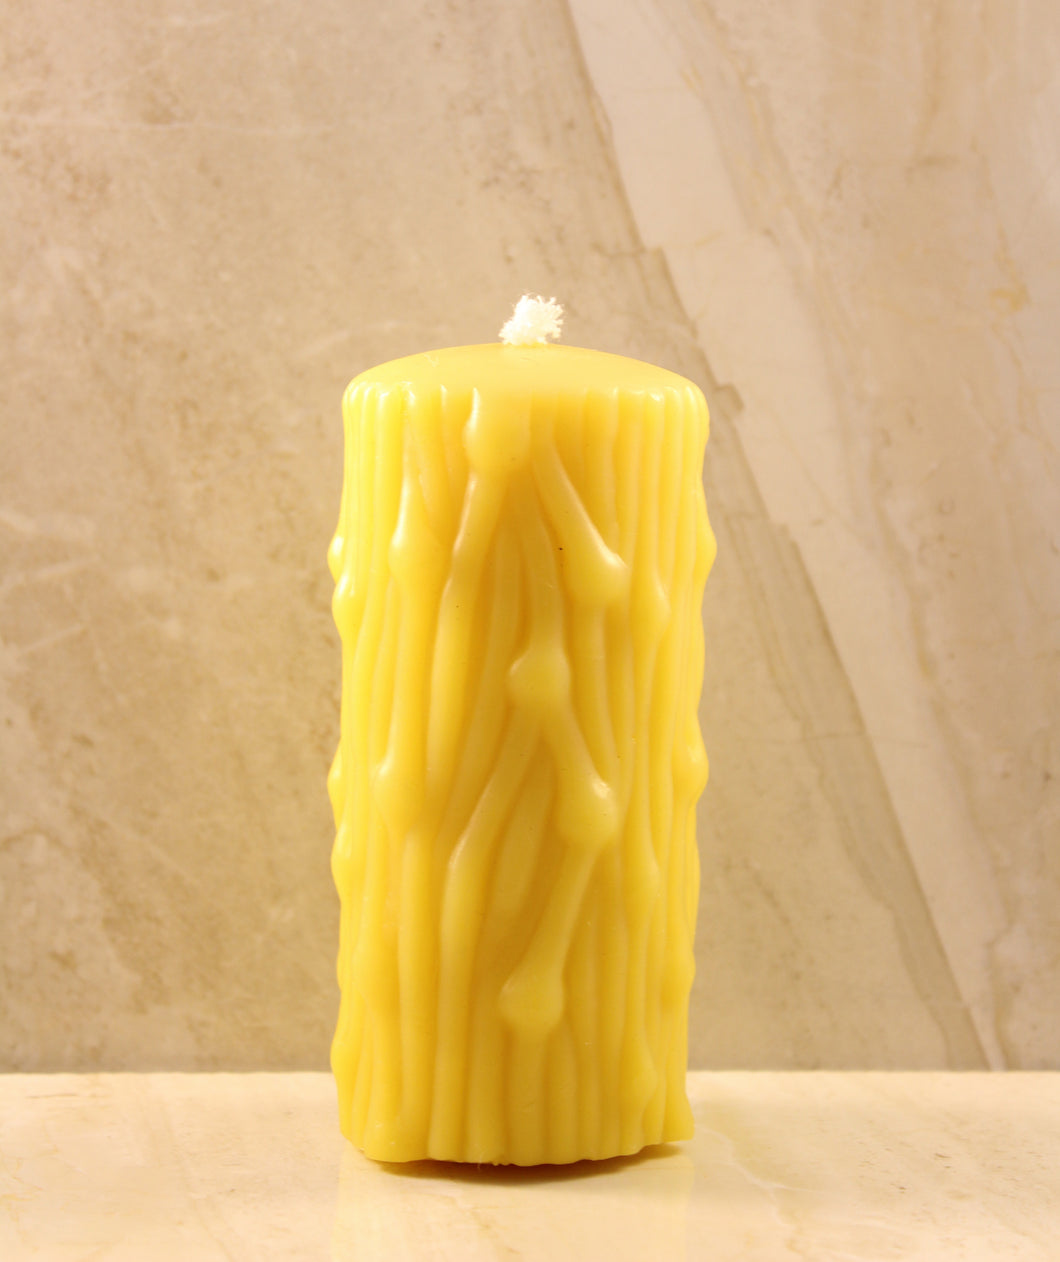 Bumpy Beeswax Candle 2